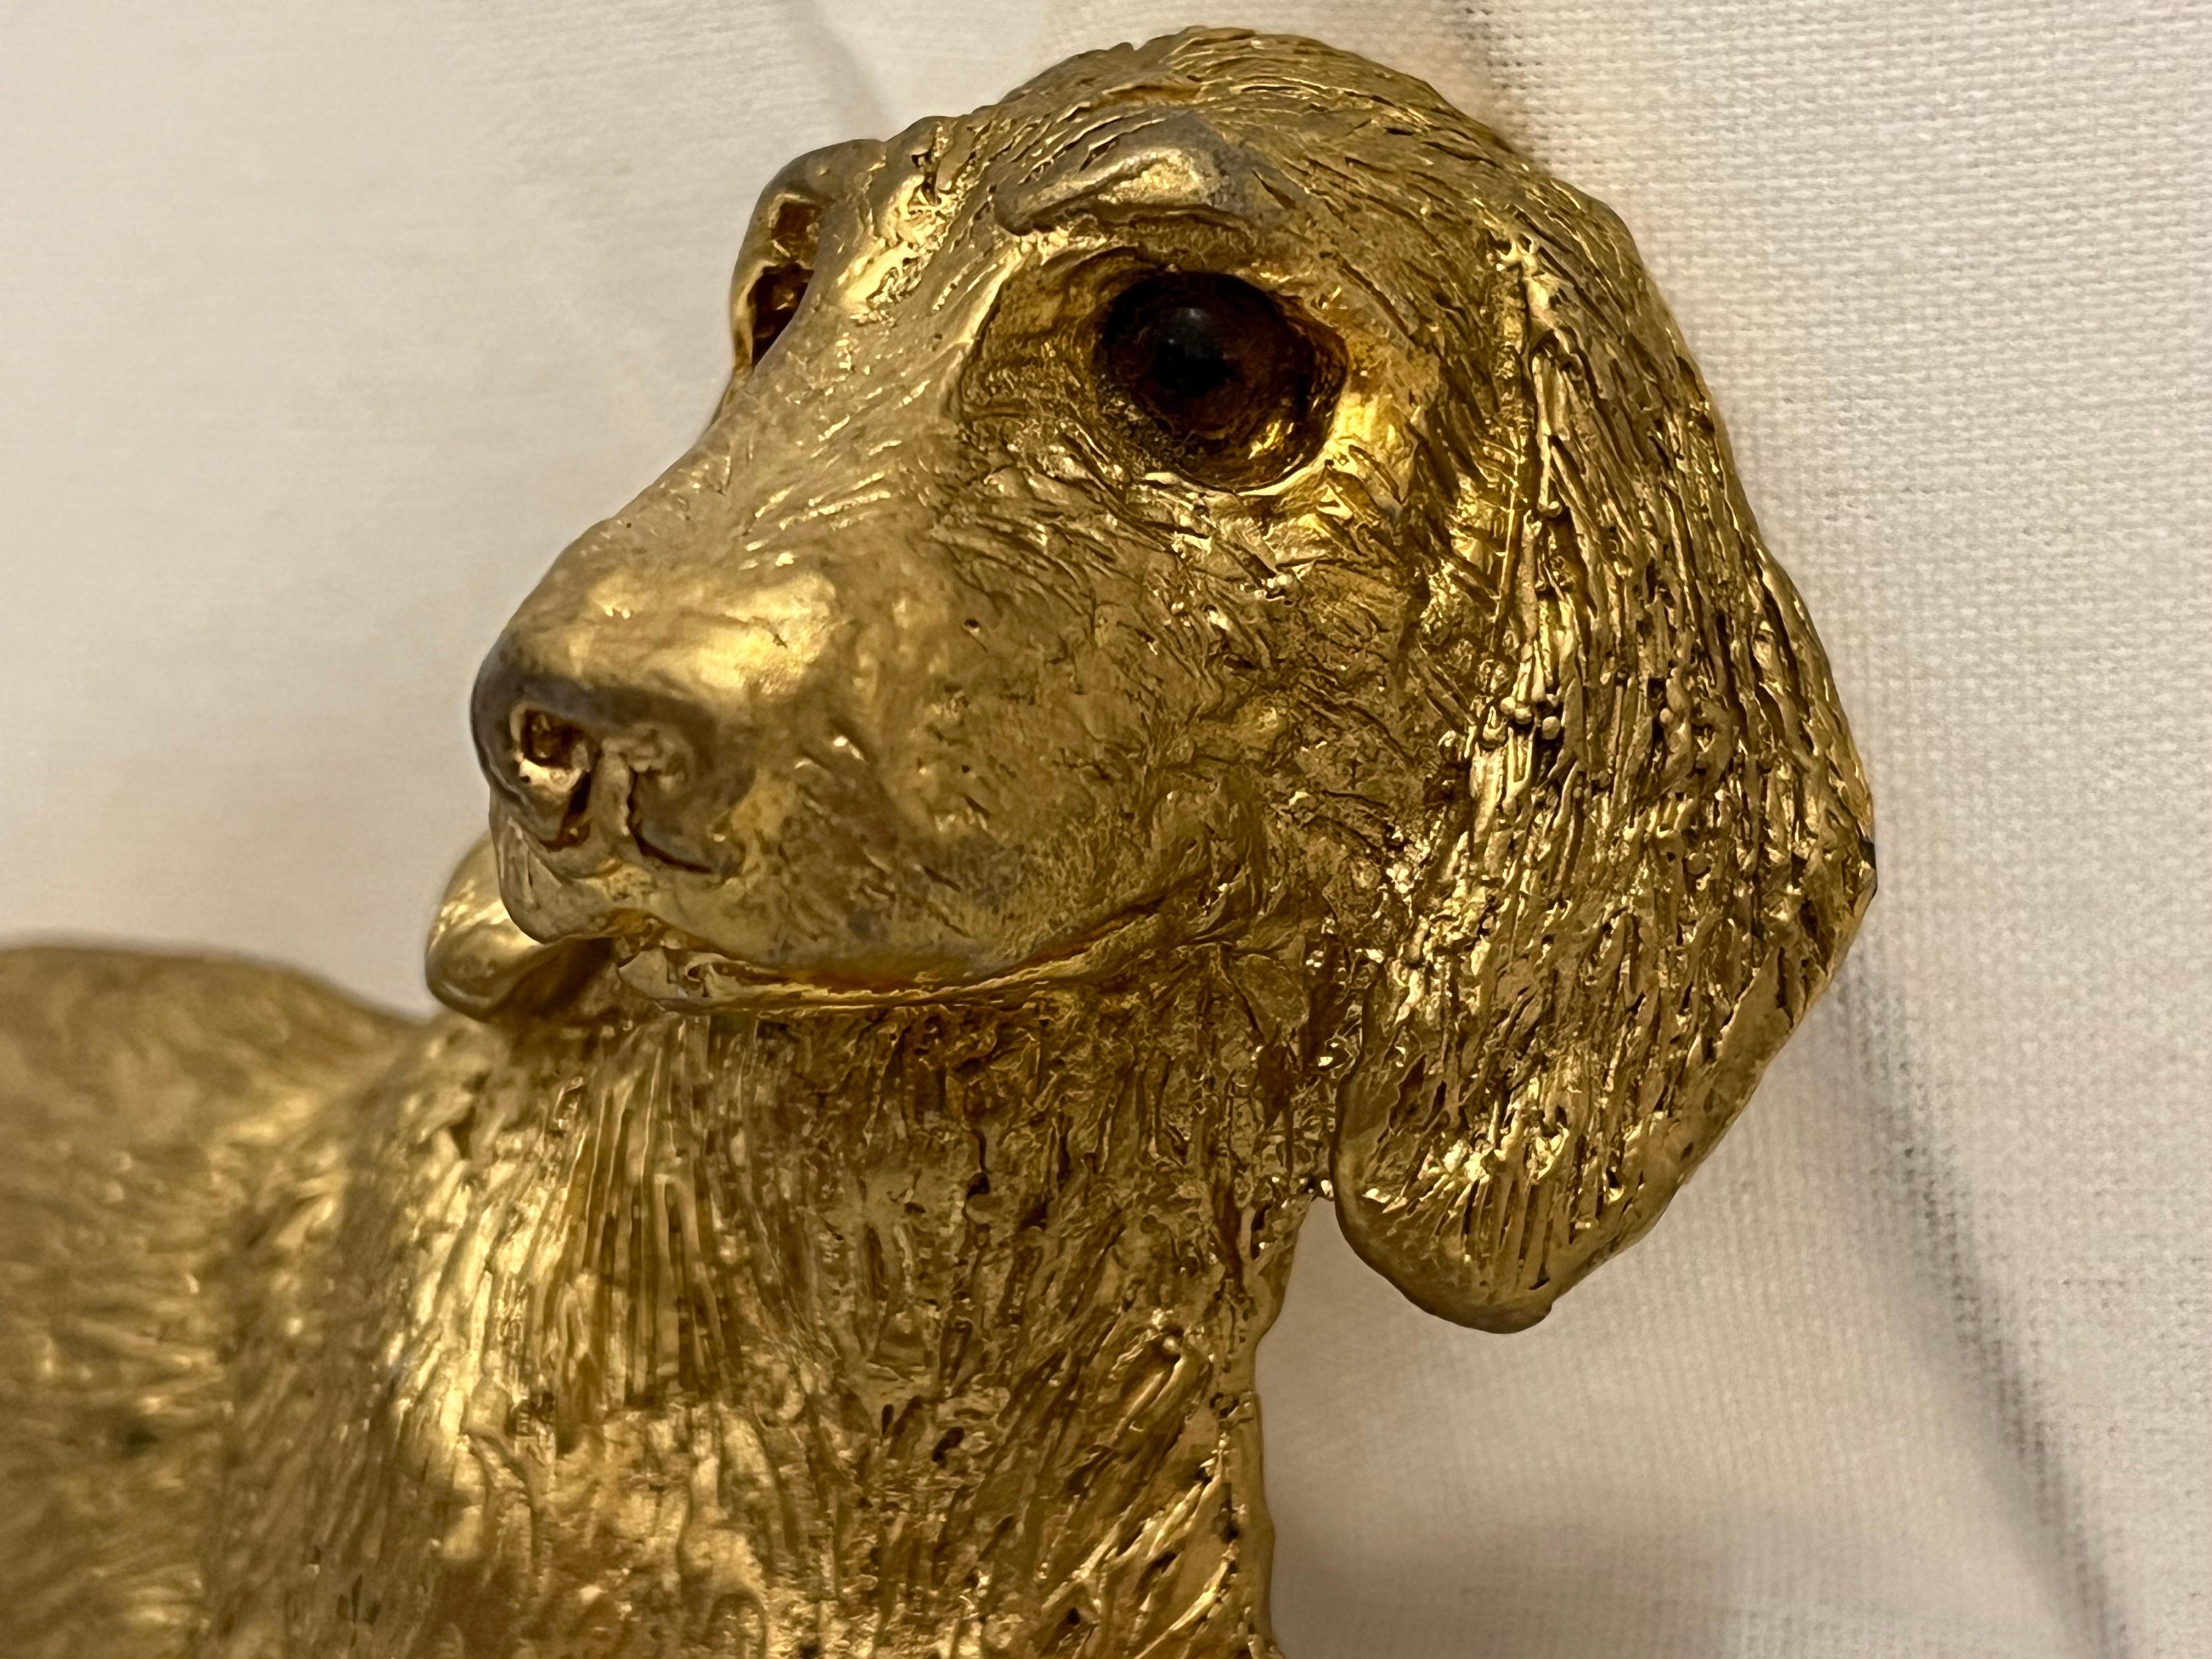 Vintage 1992 Mimi Di Niscemi Signed Golden Dachshund Belt Buckle with Brown Eyes For Sale 4